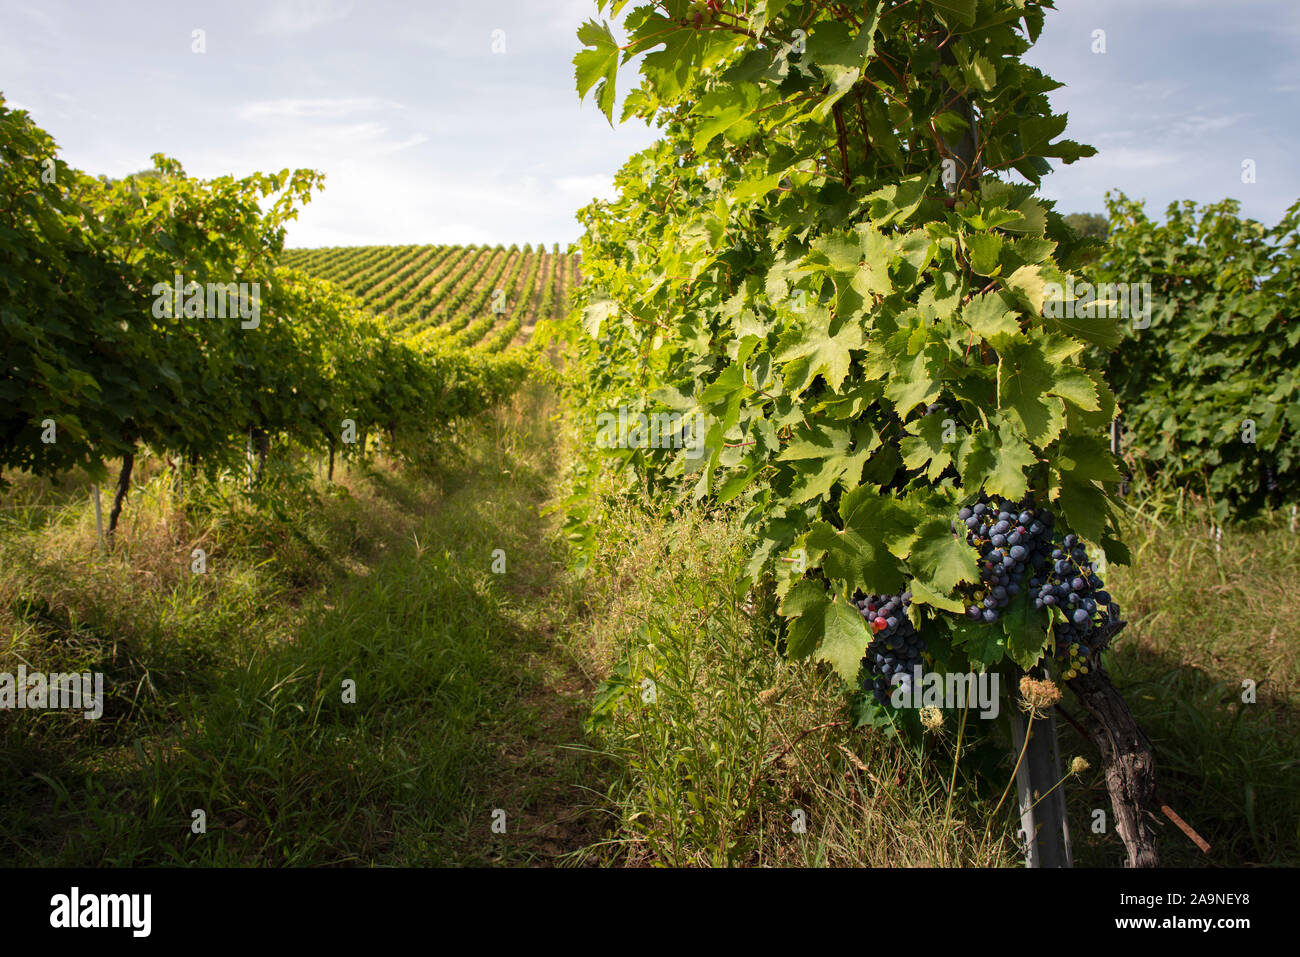 Vineyards with red grape for wine making. Big italian vineyard rows. Sunny day. Stock Photo